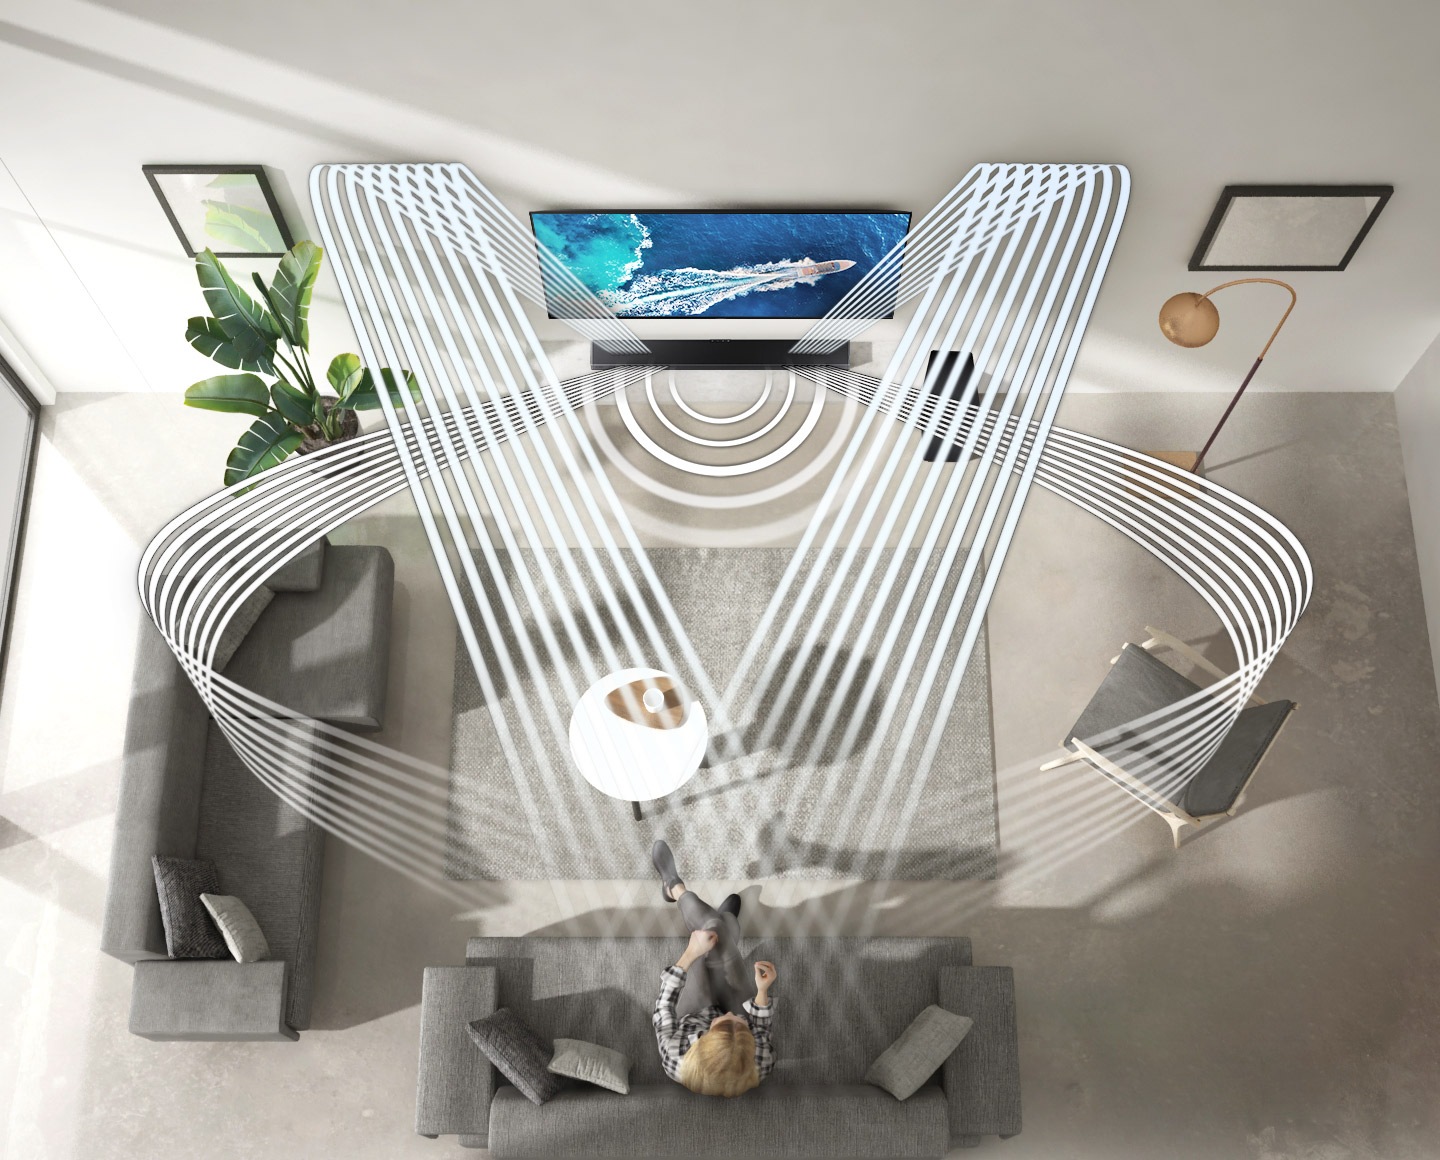 Various soundwave graphics coming from soundbar illustrate how the woman enjoying QLED TV in her living room experiences sound created by Samsung Acoustic Beam. 2 soundwave graphics are up-firing from the top of the soundbar and toward the woman. 3 soundwave graphics are coming from the side and center of the soundbar and toward the woman.